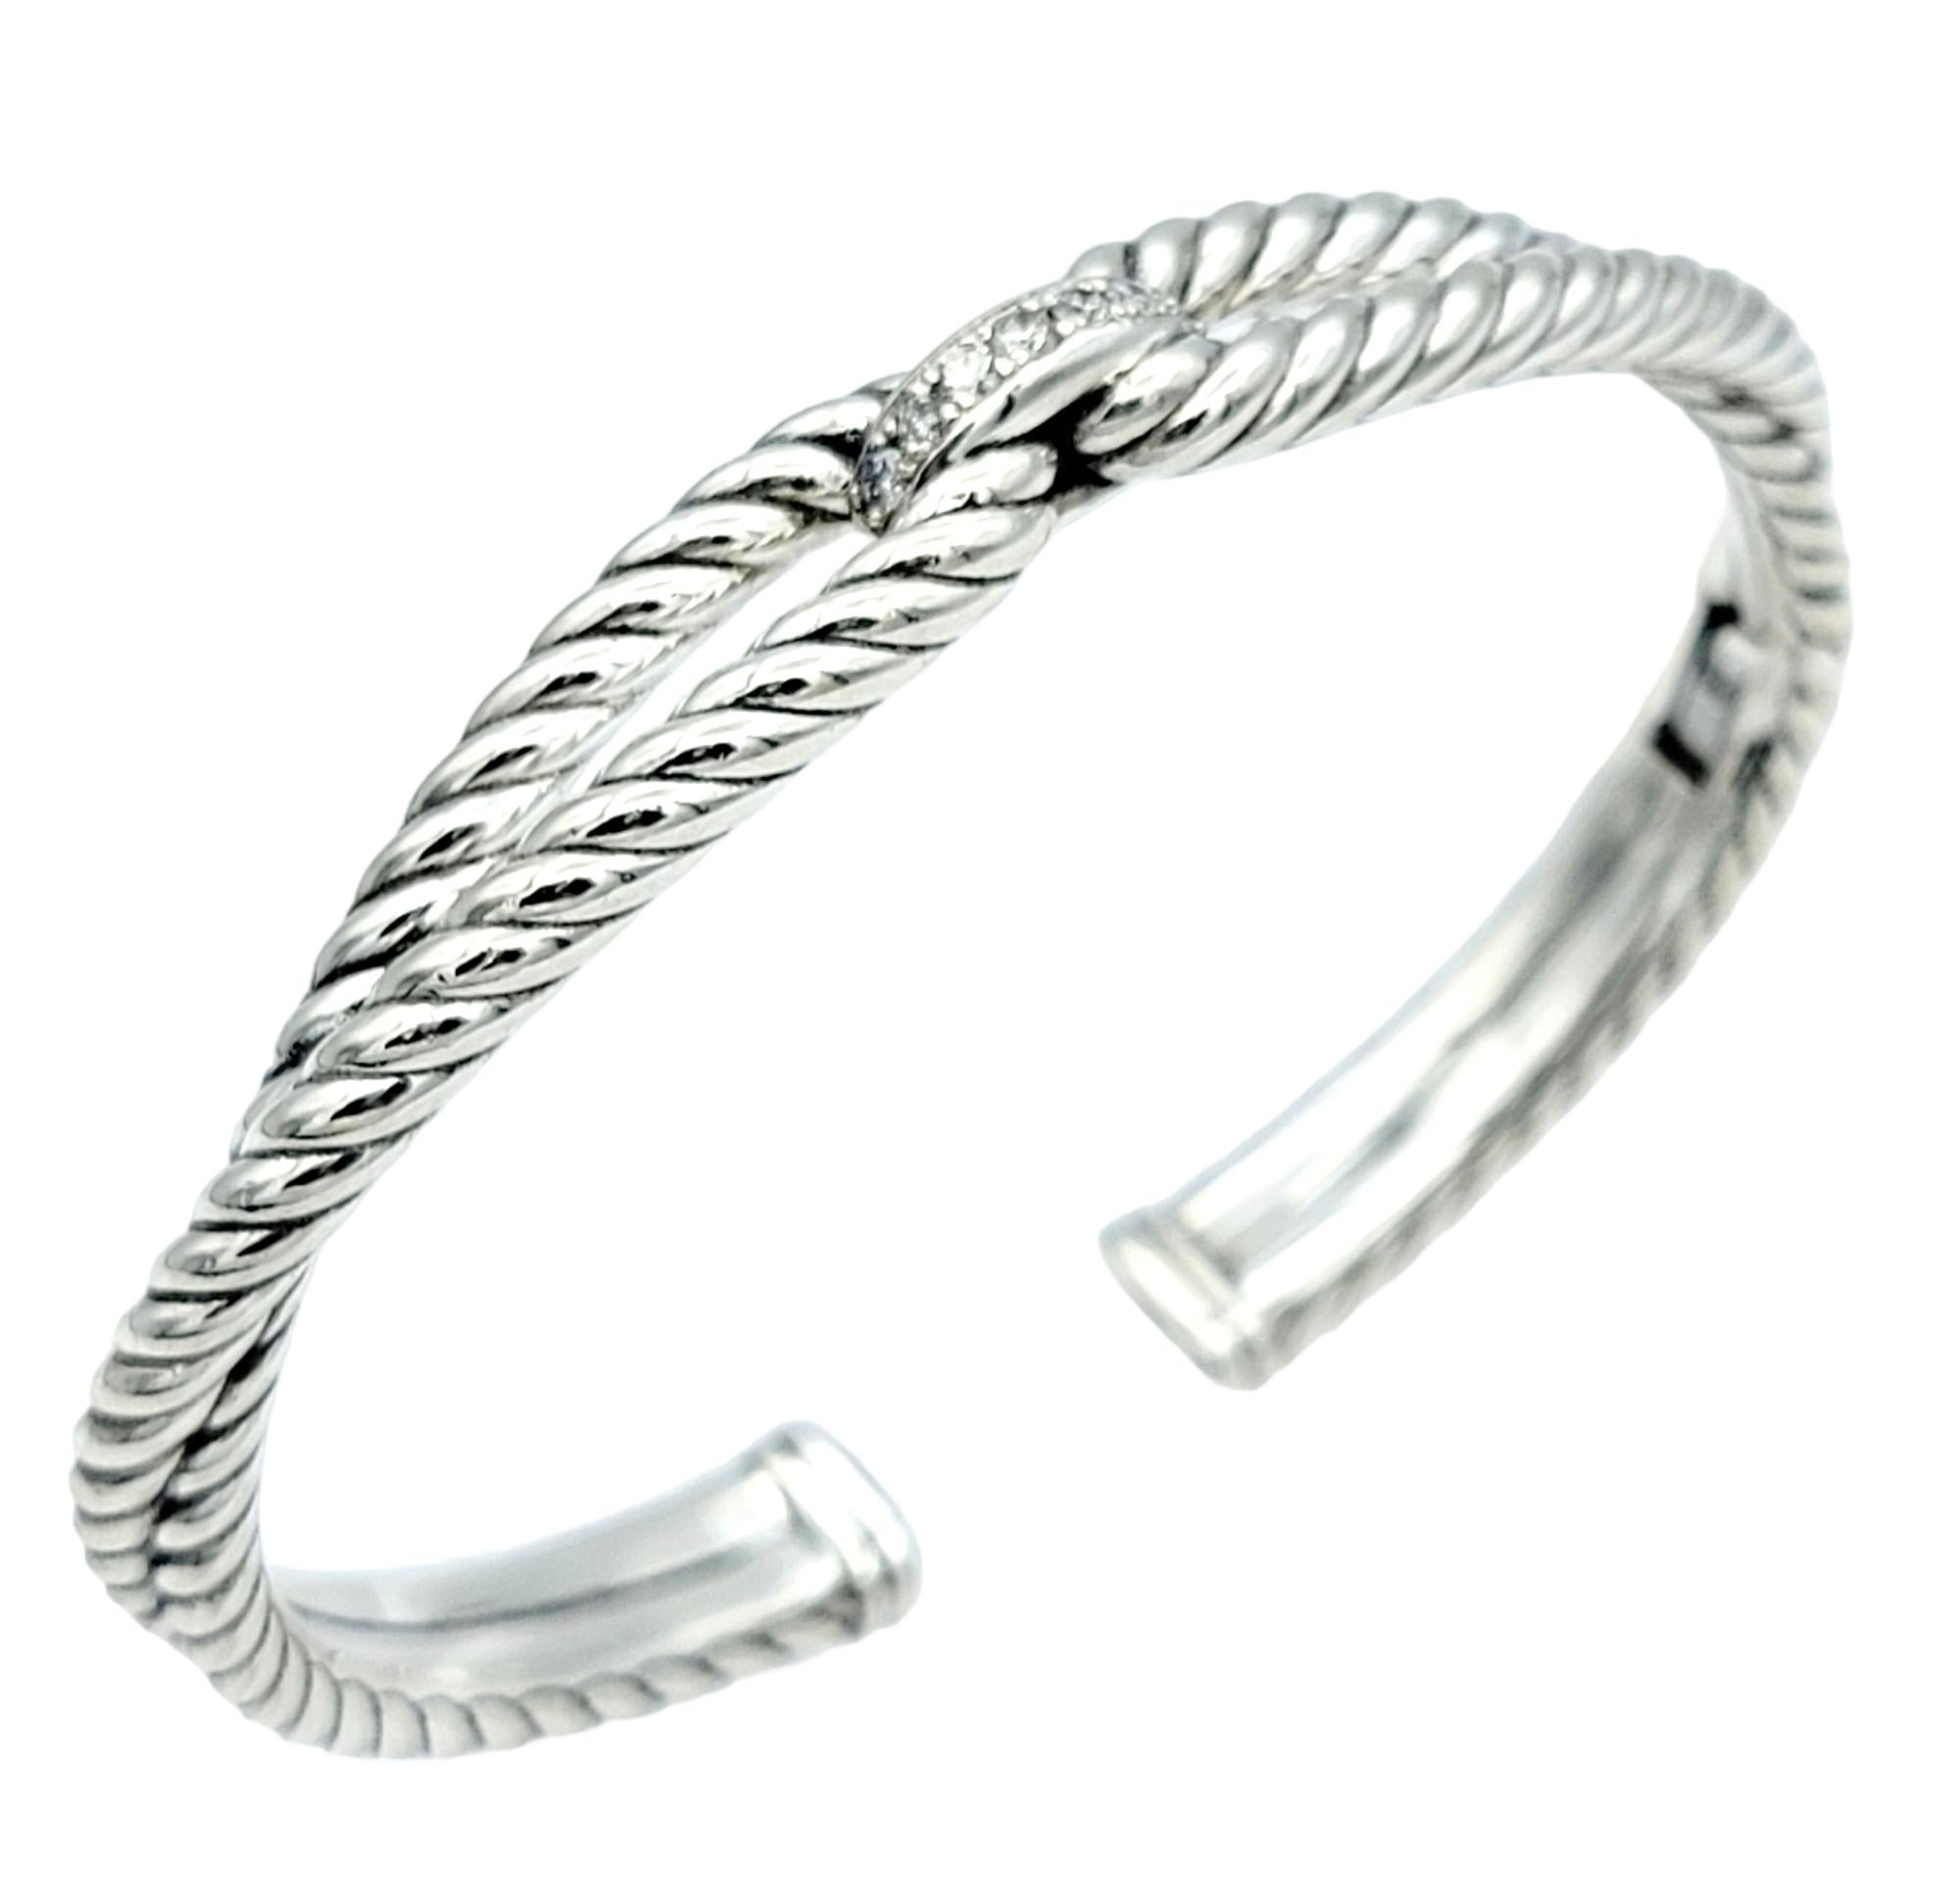 Chic sterling silver and diamond bracelet by popular jewelry designer, David Yurman. Founded in 1980 by artists David and Sybil Yurman, the company is, in their own words, “one long art project.” Their ability to fuse fashion, art and jewelry into